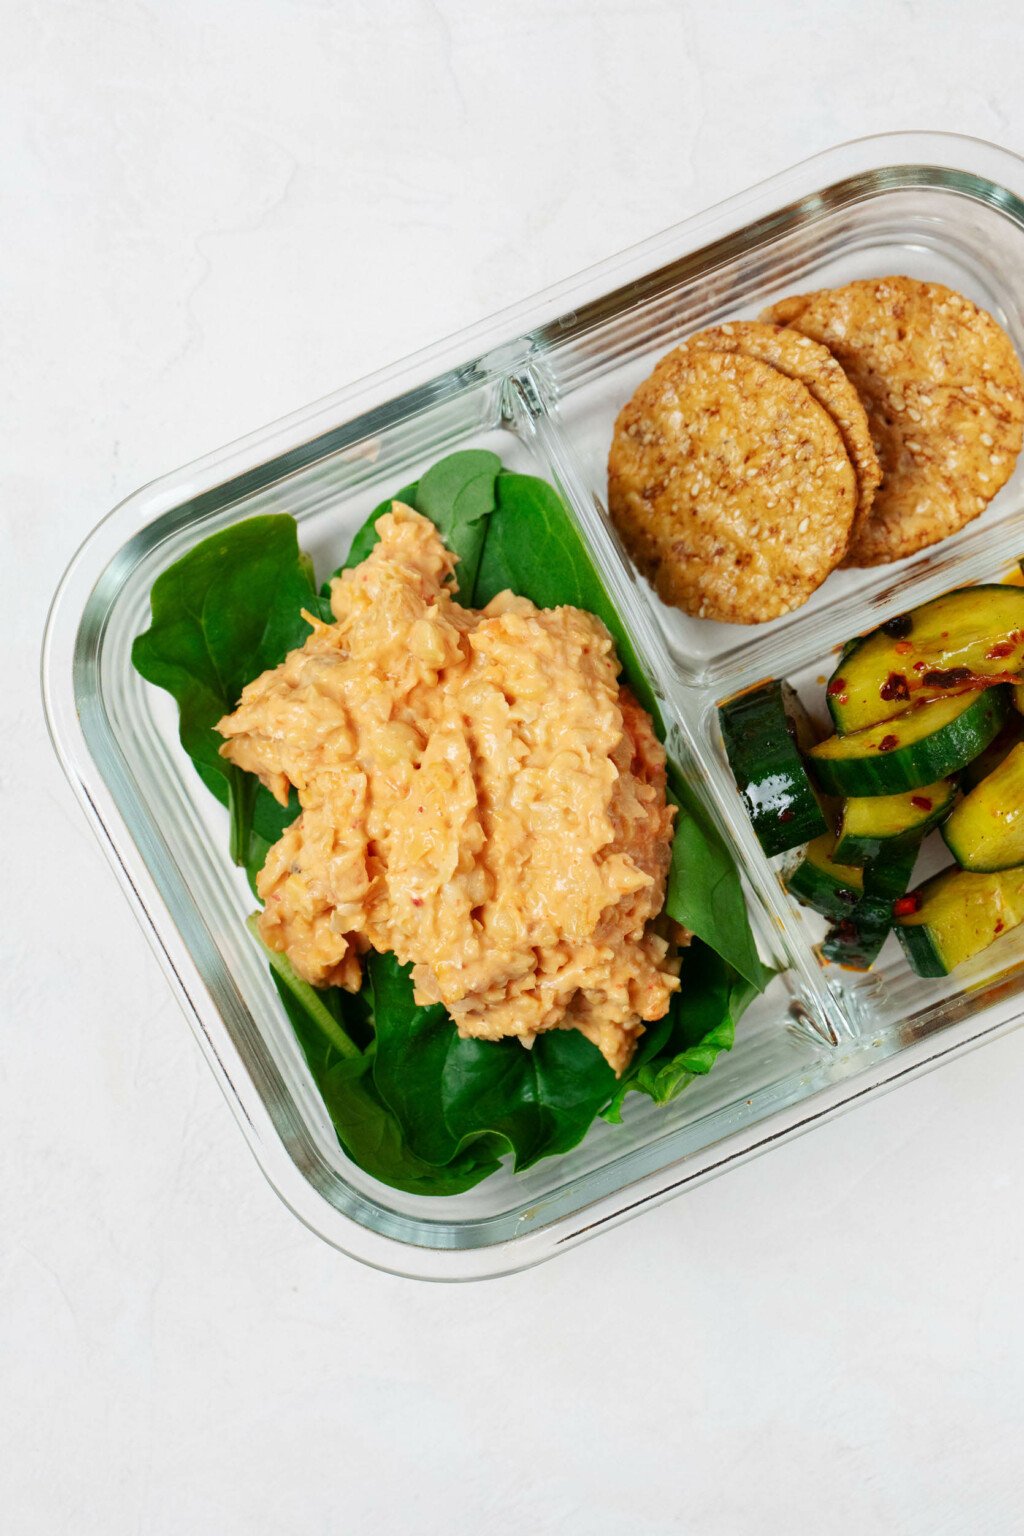 A small, Pyrex bento box is pictured on a white surface. It contains a smashed chickpea salad, marinated cucumbers, and rice crackers.